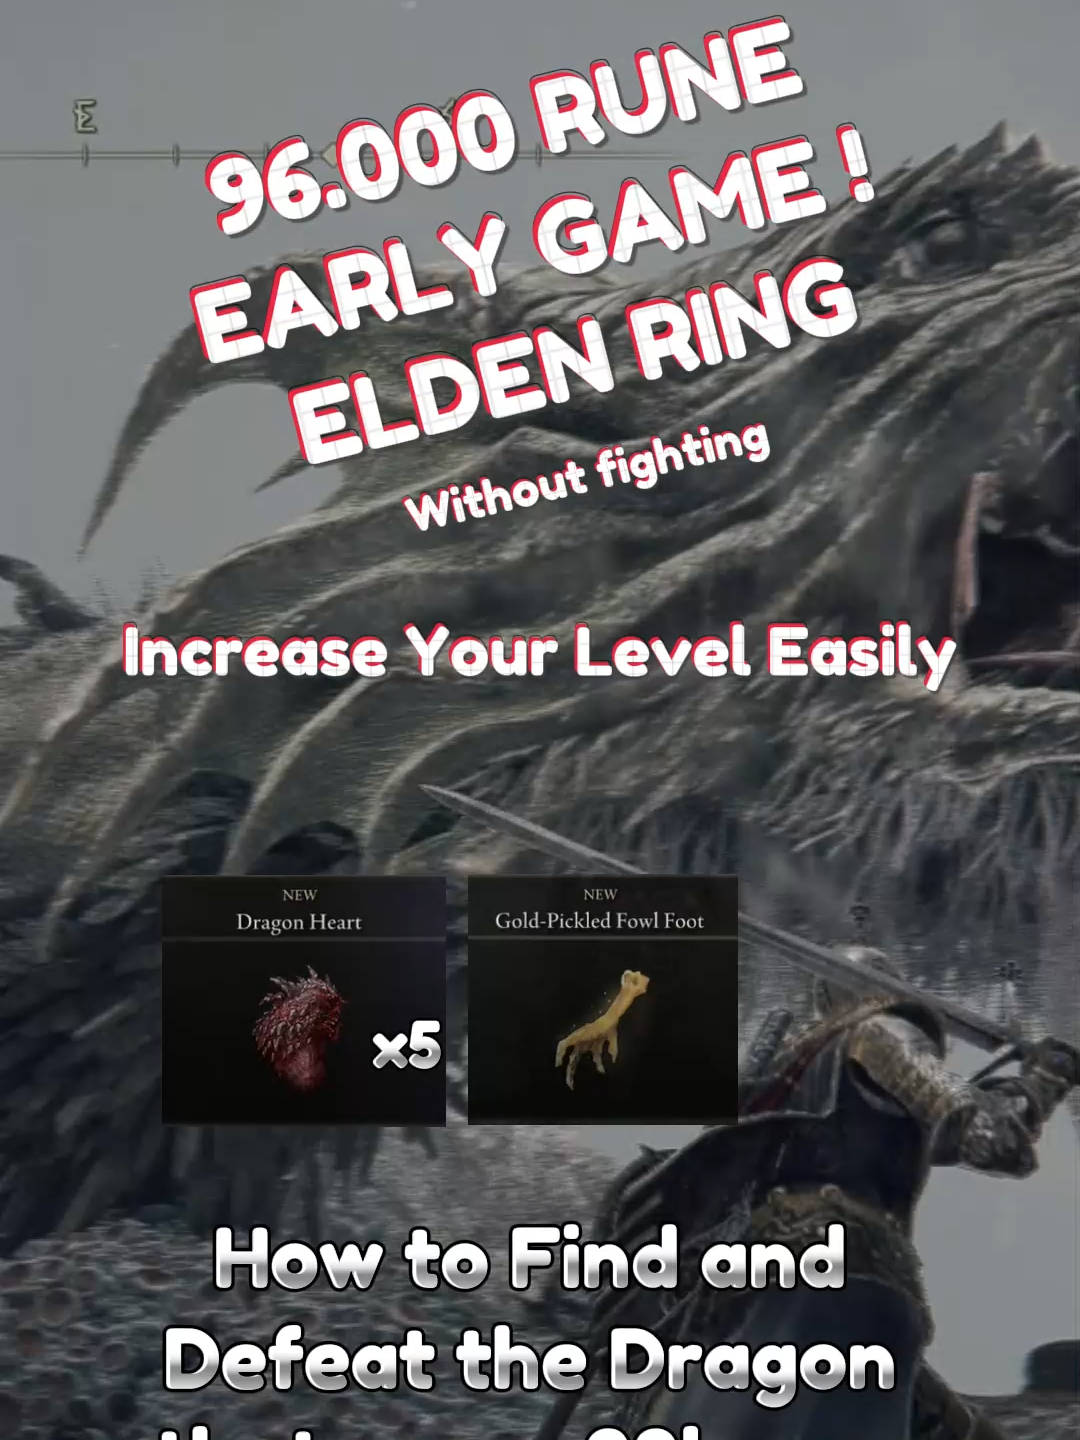 Early Game 96,000 Runes Location Elden Ring, Find The Big Dragon in Caelid Fast and Easily - Without Fighting. Beginner Guide. Tip to start the game well. Increase your level easily in elden ring thanks to this early game tip. find the greyoll dragon. You will also get 5 dragon hearts Tip for beginners, you recover 96,000 runes easily you just need to defeat Caelid's dragon with a weapon that inflicts bleeding, you can do it from the start of the game because you don't need to fight but just hit the tail of the dragon behind him. tutorial and location. #eldenring #eldenringtips #eldenringtutorial #eldenringguide #eldenringhelp #eldenringhype #fyp #eldenringrunes #eldenringrunefarm #eldenringclips #eldenringbuild #eldenringtricks #eldenringedit